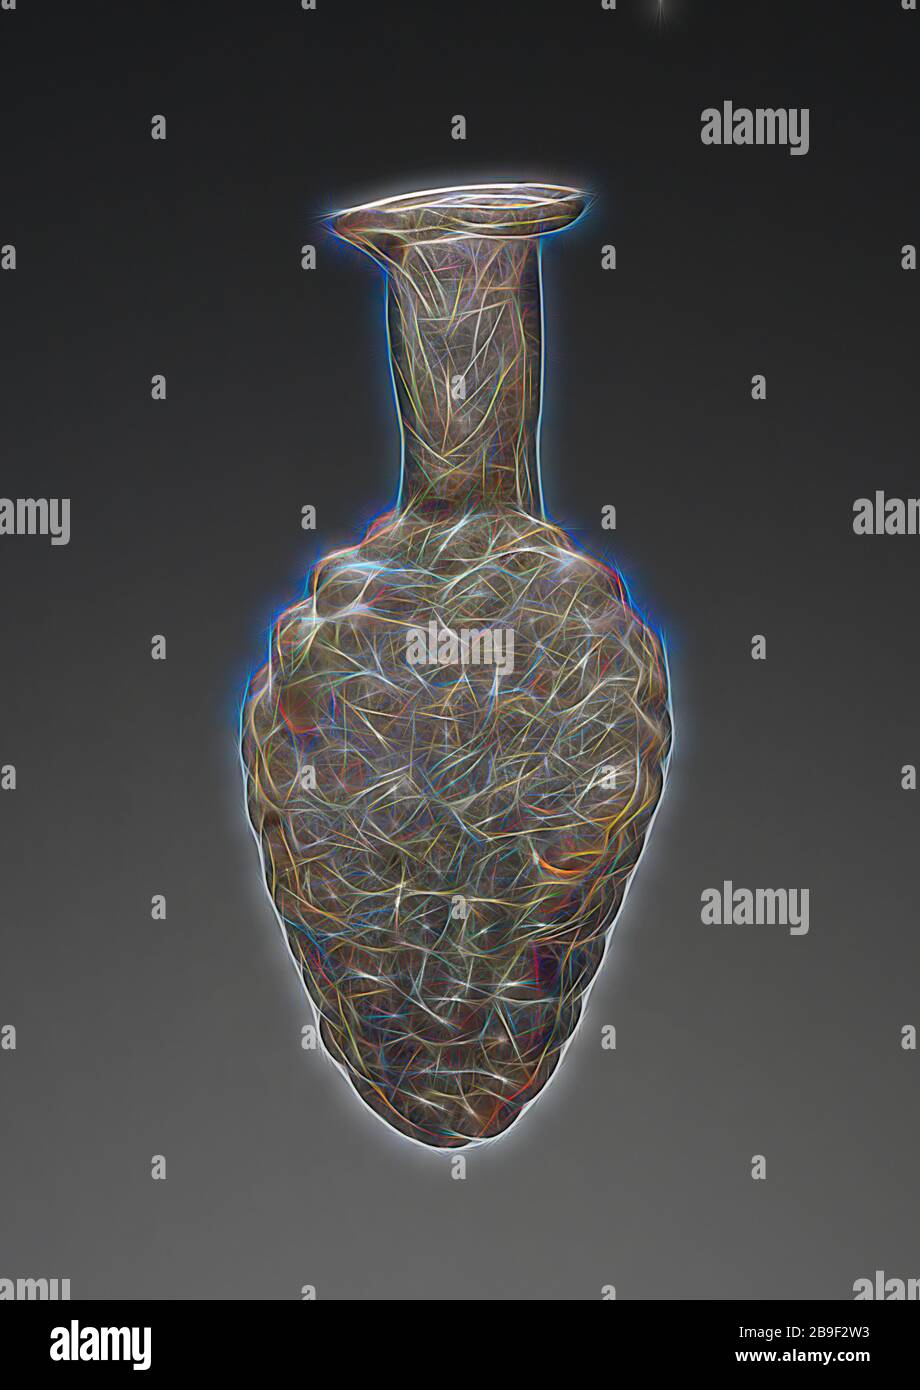 Grape Flask, Eastern Mediterranean, about 2nd - 3rd century, Glass, 13.7 cm (5 3,8 in, Reimagined by Gibon, design of warm cheerful glowing of brightness and light rays radiance. Classic art reinvented with a modern twist. Photography inspired by futurism, embracing dynamic energy of modern technology, movement, speed and revolutionize culture. Stock Photo